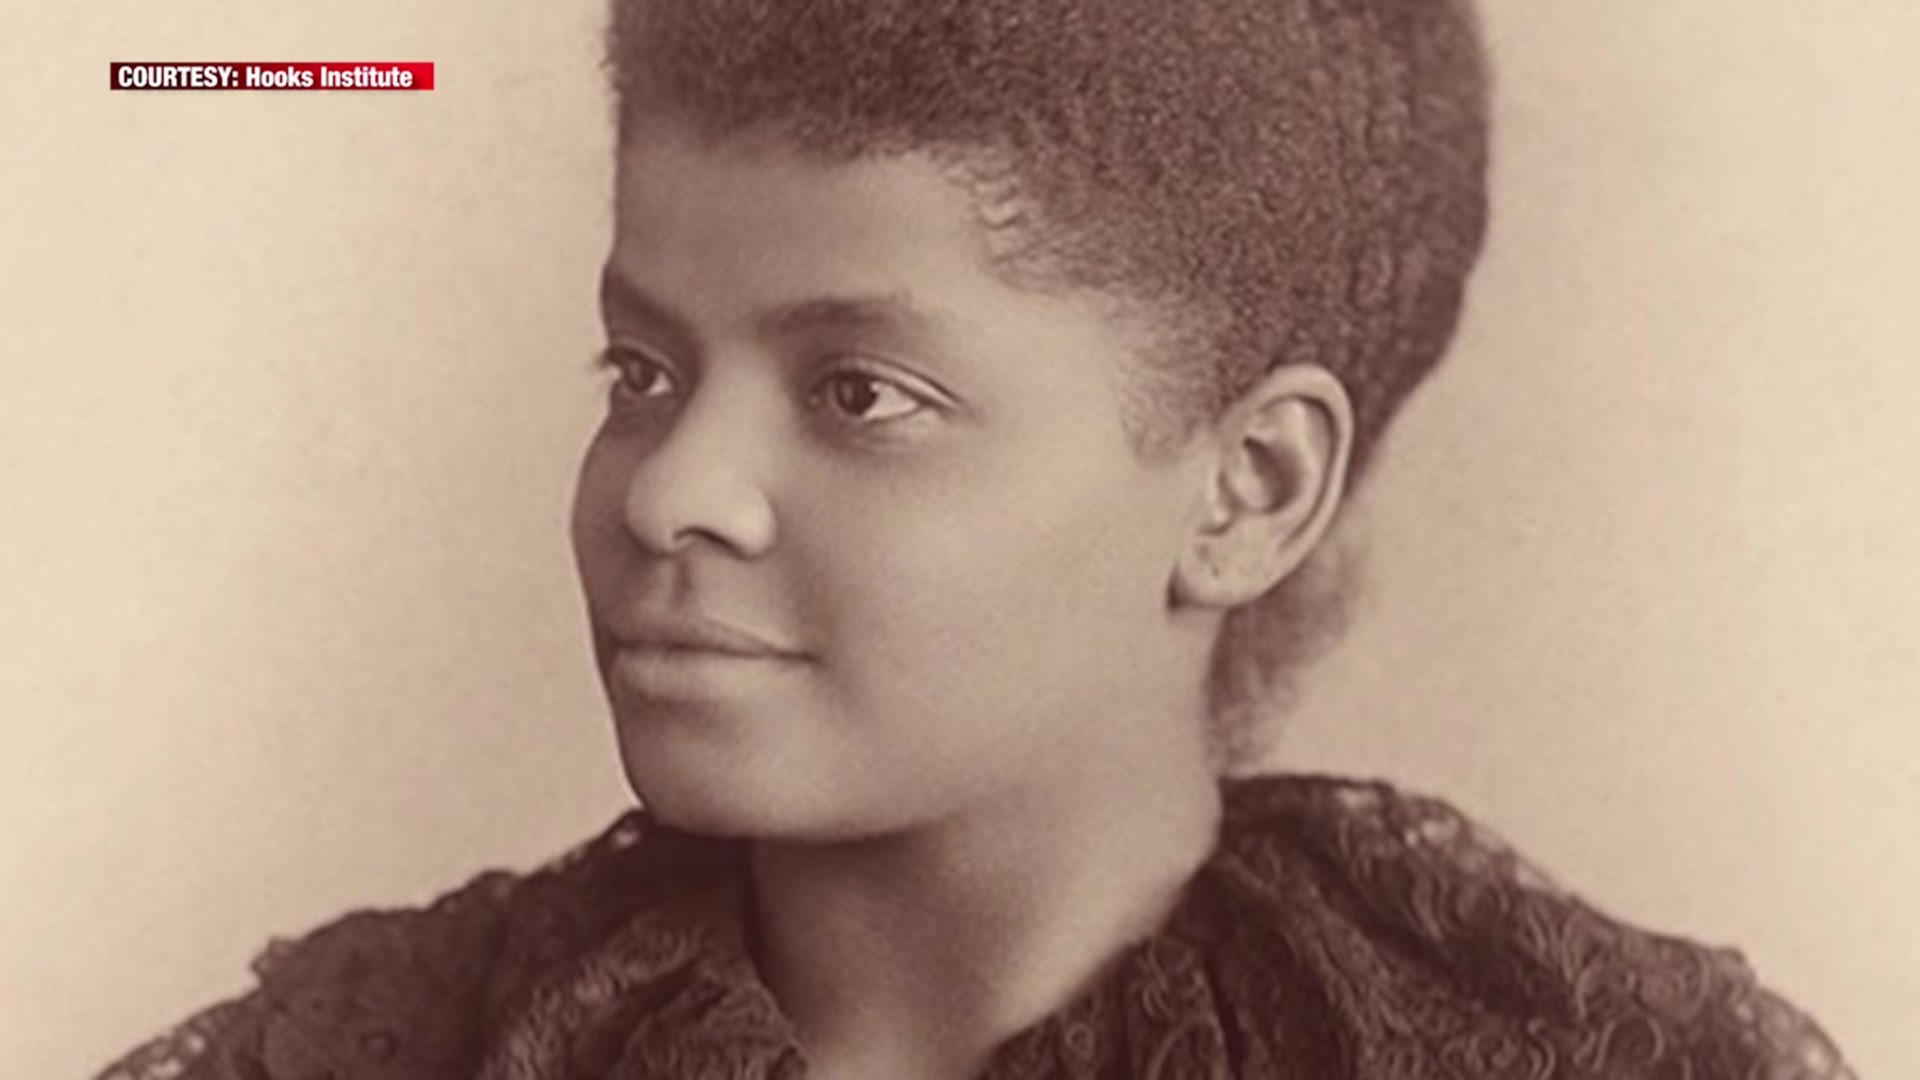 Full-length feature film to focus on life & legacy of Ida B. Wells